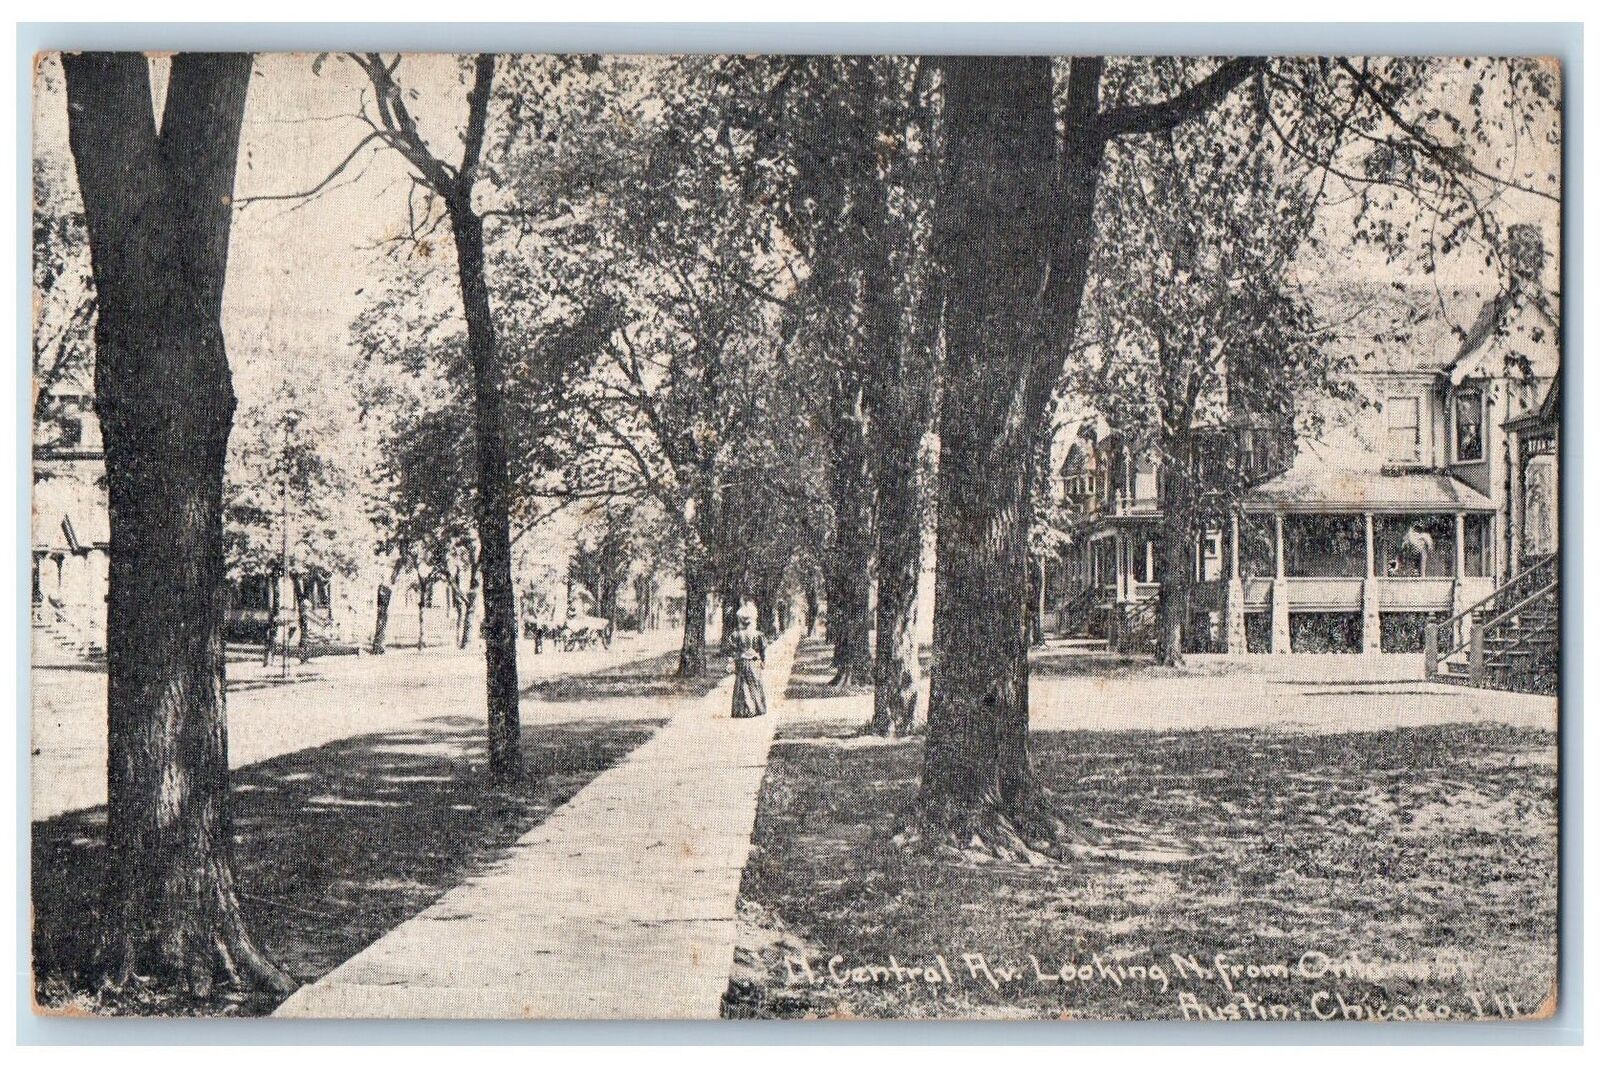 1909 North Central Ave. Looking North From Austin Chicago Illinois IL Postcard